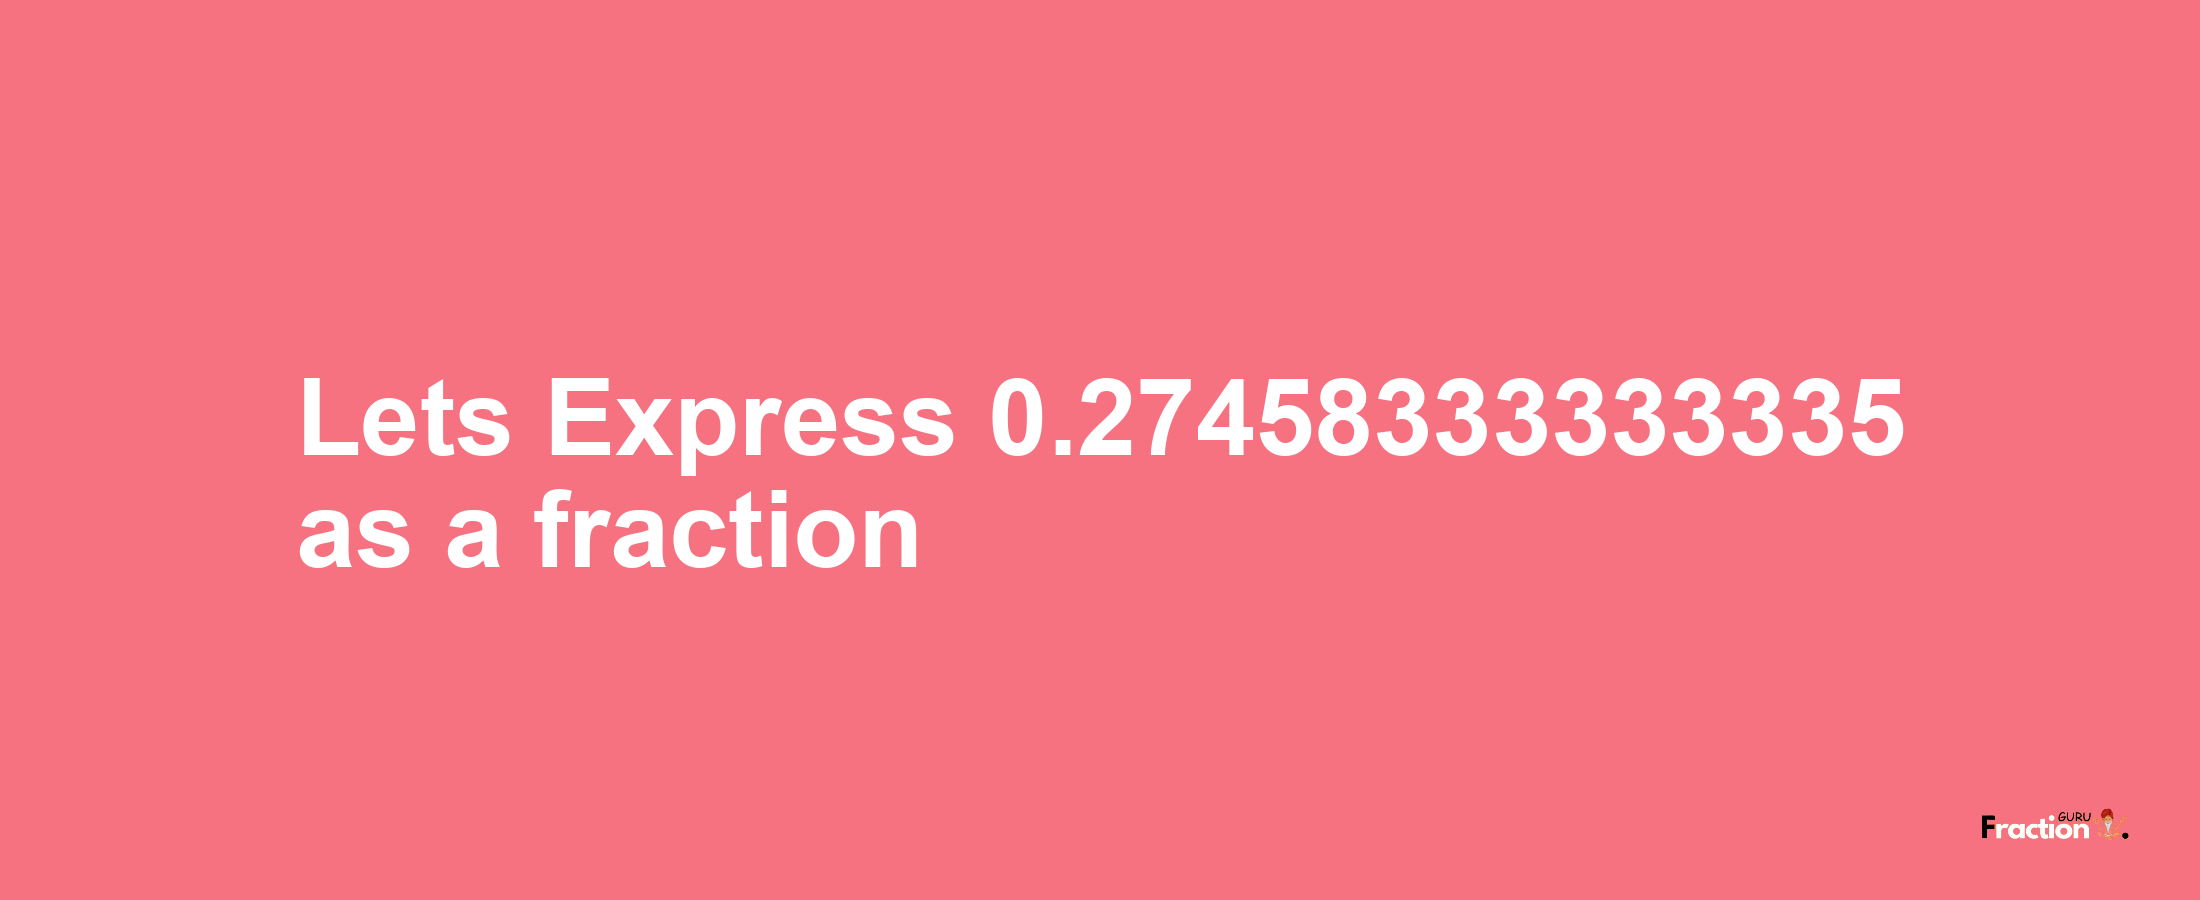 Lets Express 0.27458333333335 as afraction